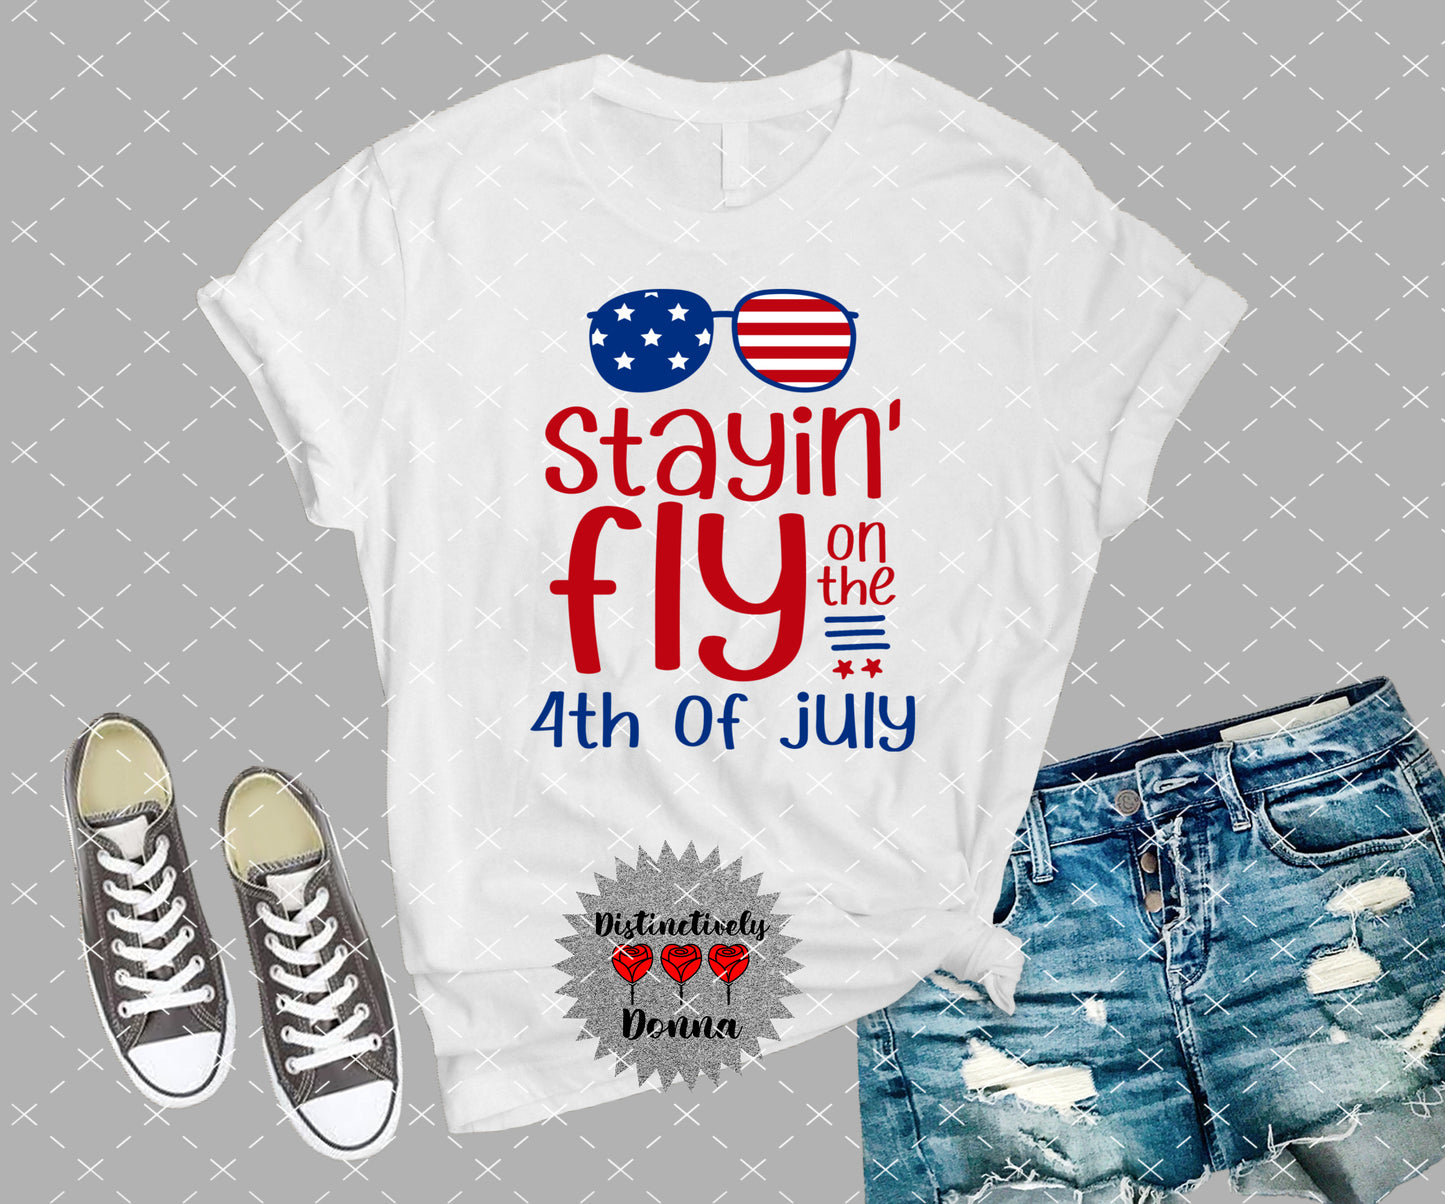 STAYING FLY ON THE 4TH OF JULY